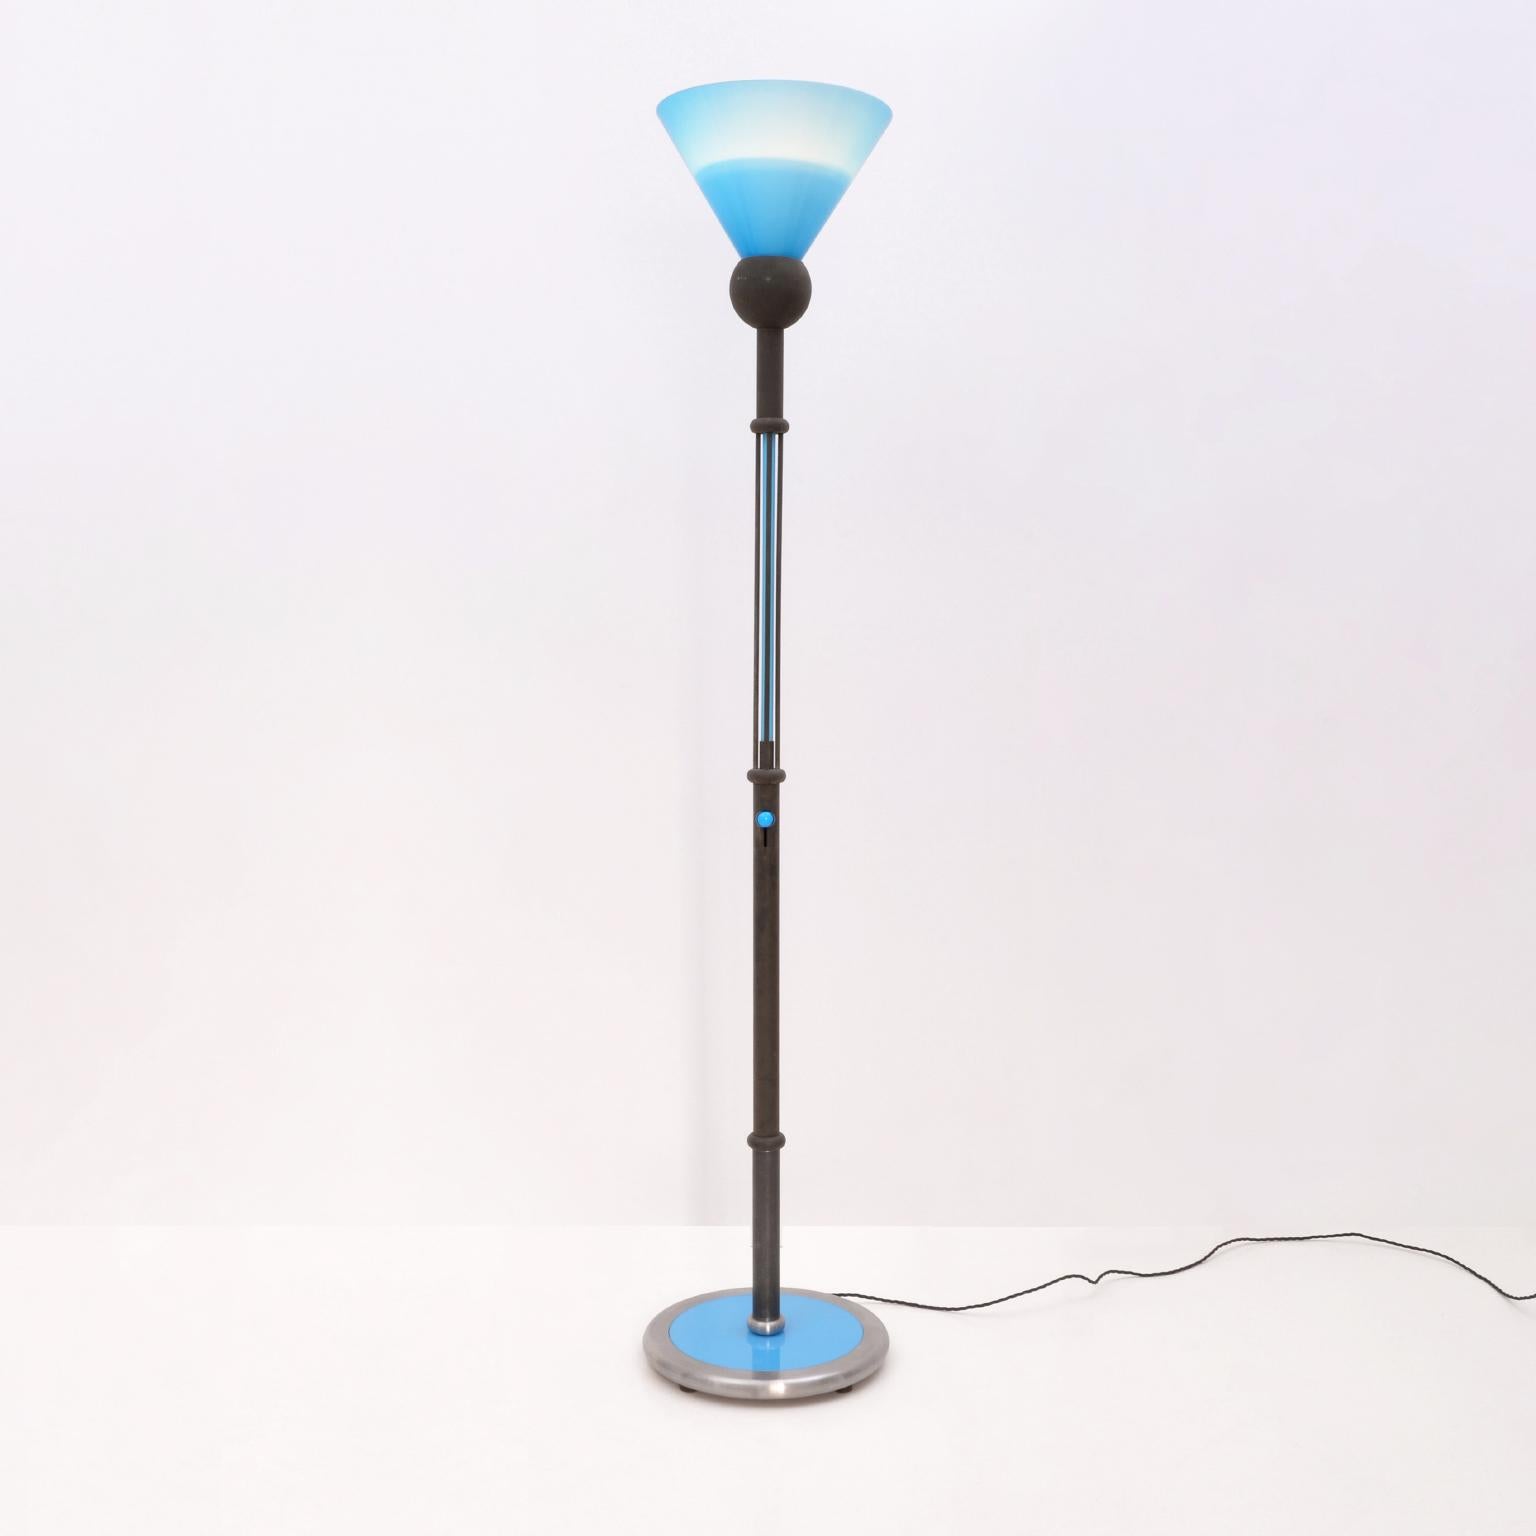 Postmodern Memphis style torchiere/ floor lamp, Italy c. 1980. The rough burnished metal lamp rod has the typical Memphis 'Pilastro' composition, with a glass tube segment and a glass light switch insertion. The blue with white inlay conical glass